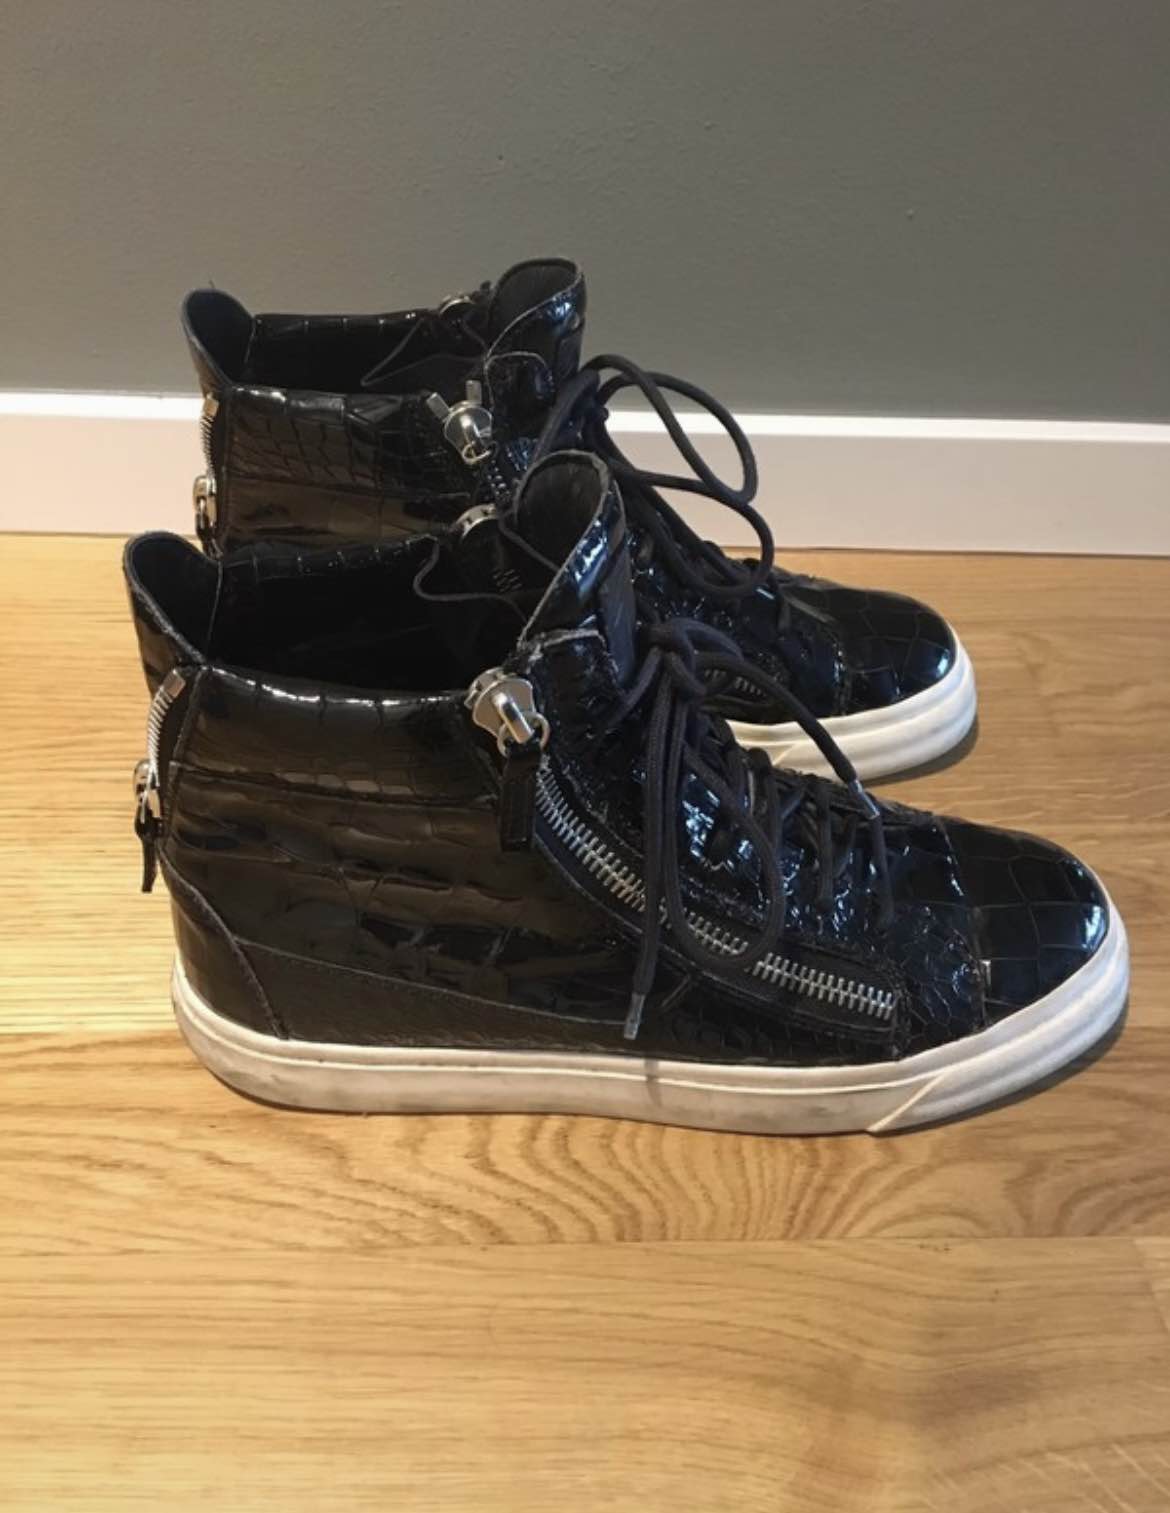 Reptile Patent Leather High Top Sneaker - 4